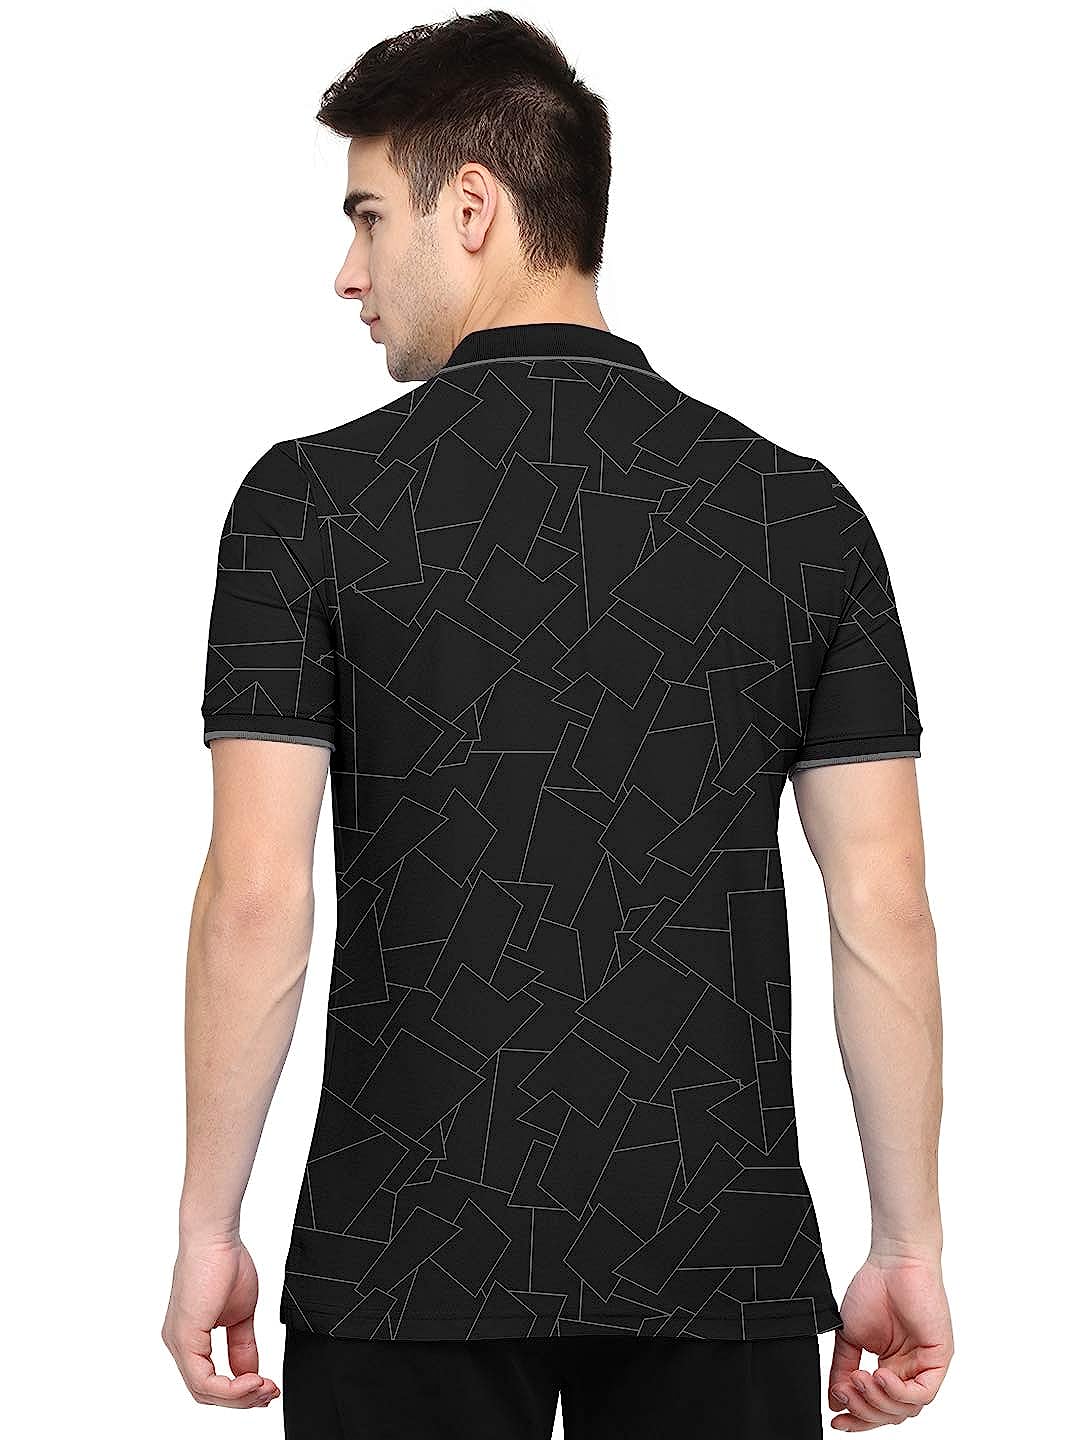 BULLMER Mens Regular Fit Printed Cotton Polo Tshirt -  Men's T-Shirts in Sri Lanka from Arcade Online Shopping - Just Rs. 3500!